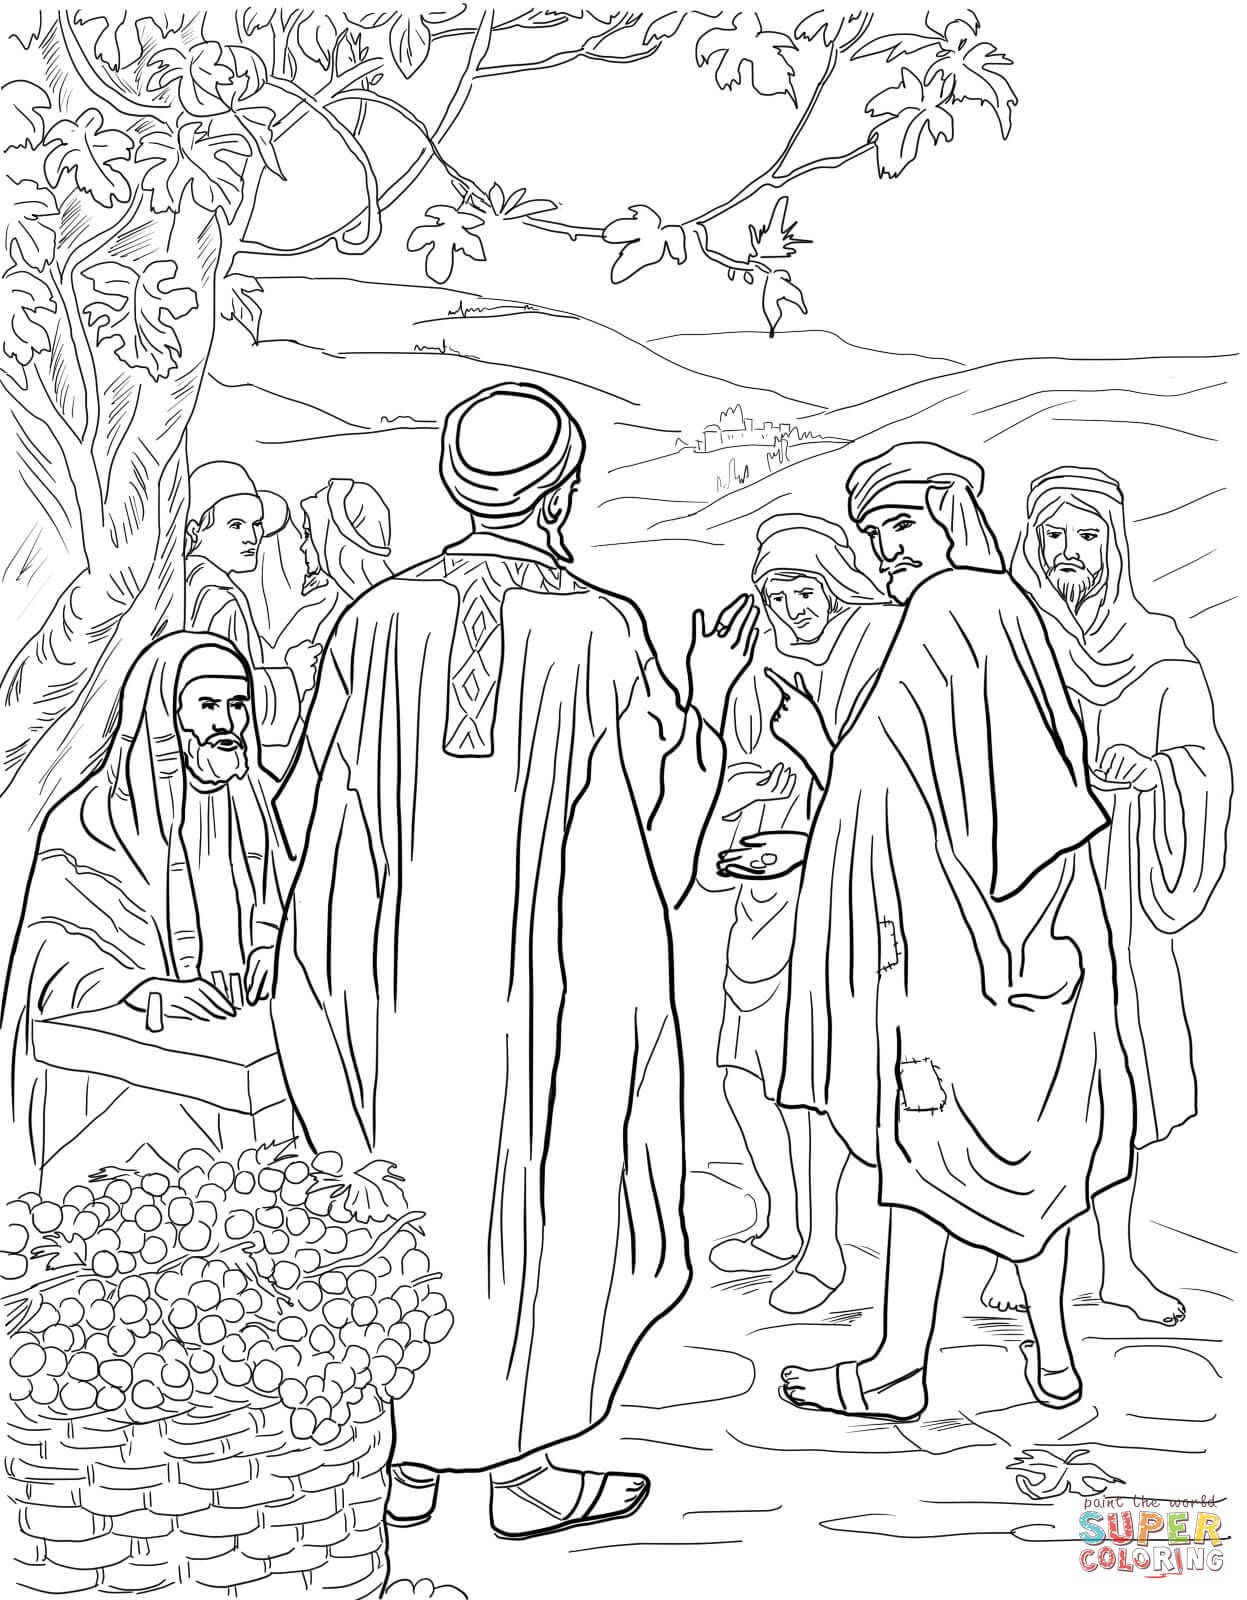 Parable of the Workers in the Vineyard ...